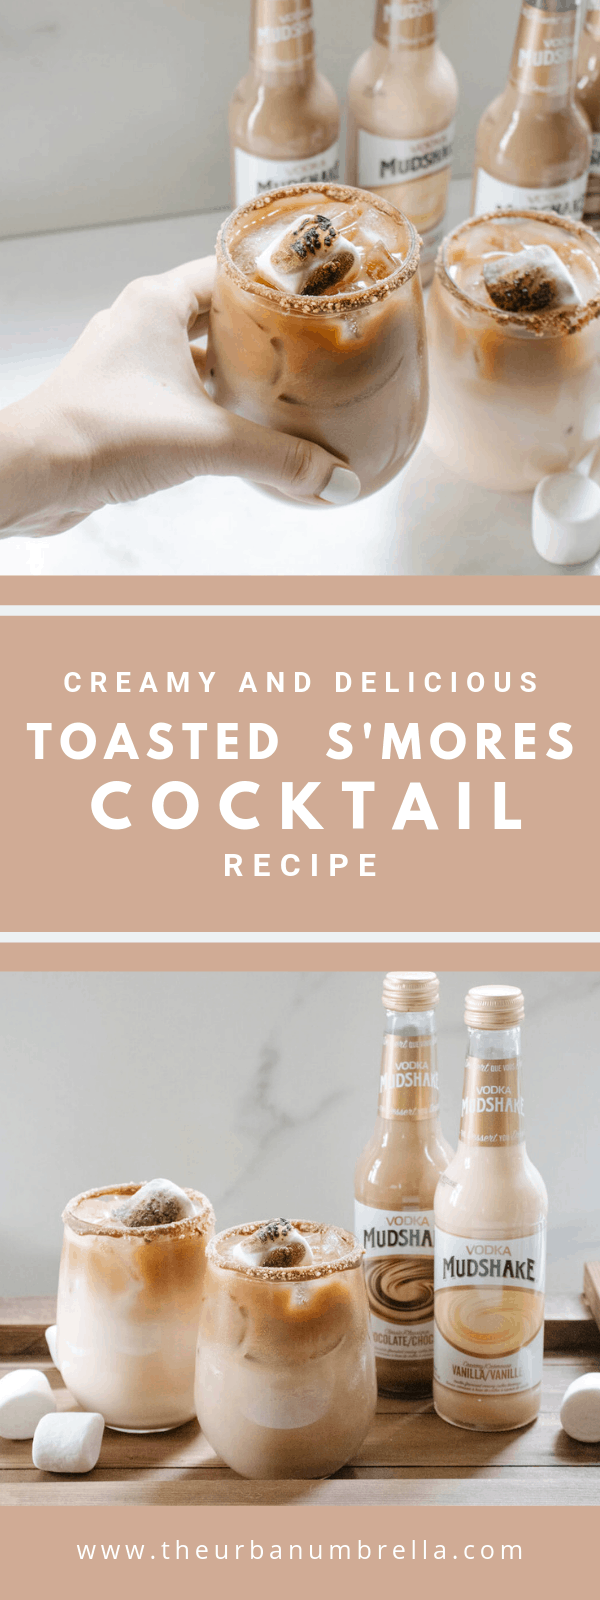 Looking for a delicious drink to enjoy by the campfire, or on your patio? Then be sure to try this EASY and super yummy Toasted S'mores Cocktail recipe!